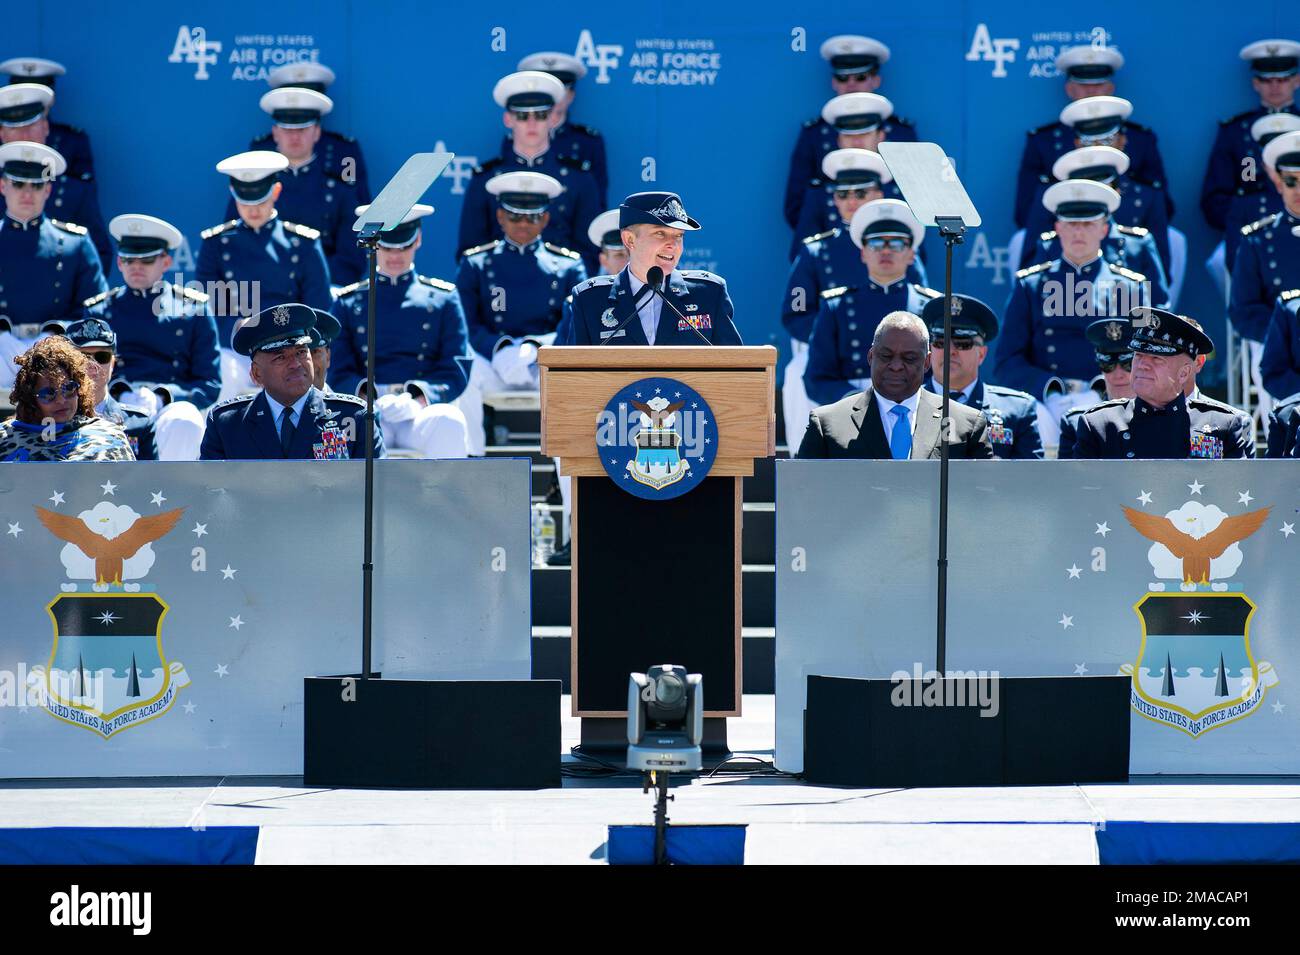 U.S. Air Force Academy -- Brigadier General Linell A. Letendre, Dean of the Faculty, presents the graduation class of 2022 during the U.S. Air Force Academy's Class of 2022 Graduation Ceremony at the Air Force Academy in Colorado Springs, Colo., May 25, 2022. Nine-hundred-seventy cadets crossed the stage to become the Air Force/Space Force’s newest second lieutenants. (U.S. Air Force photo/Joshua Armstrong) Stock Photo